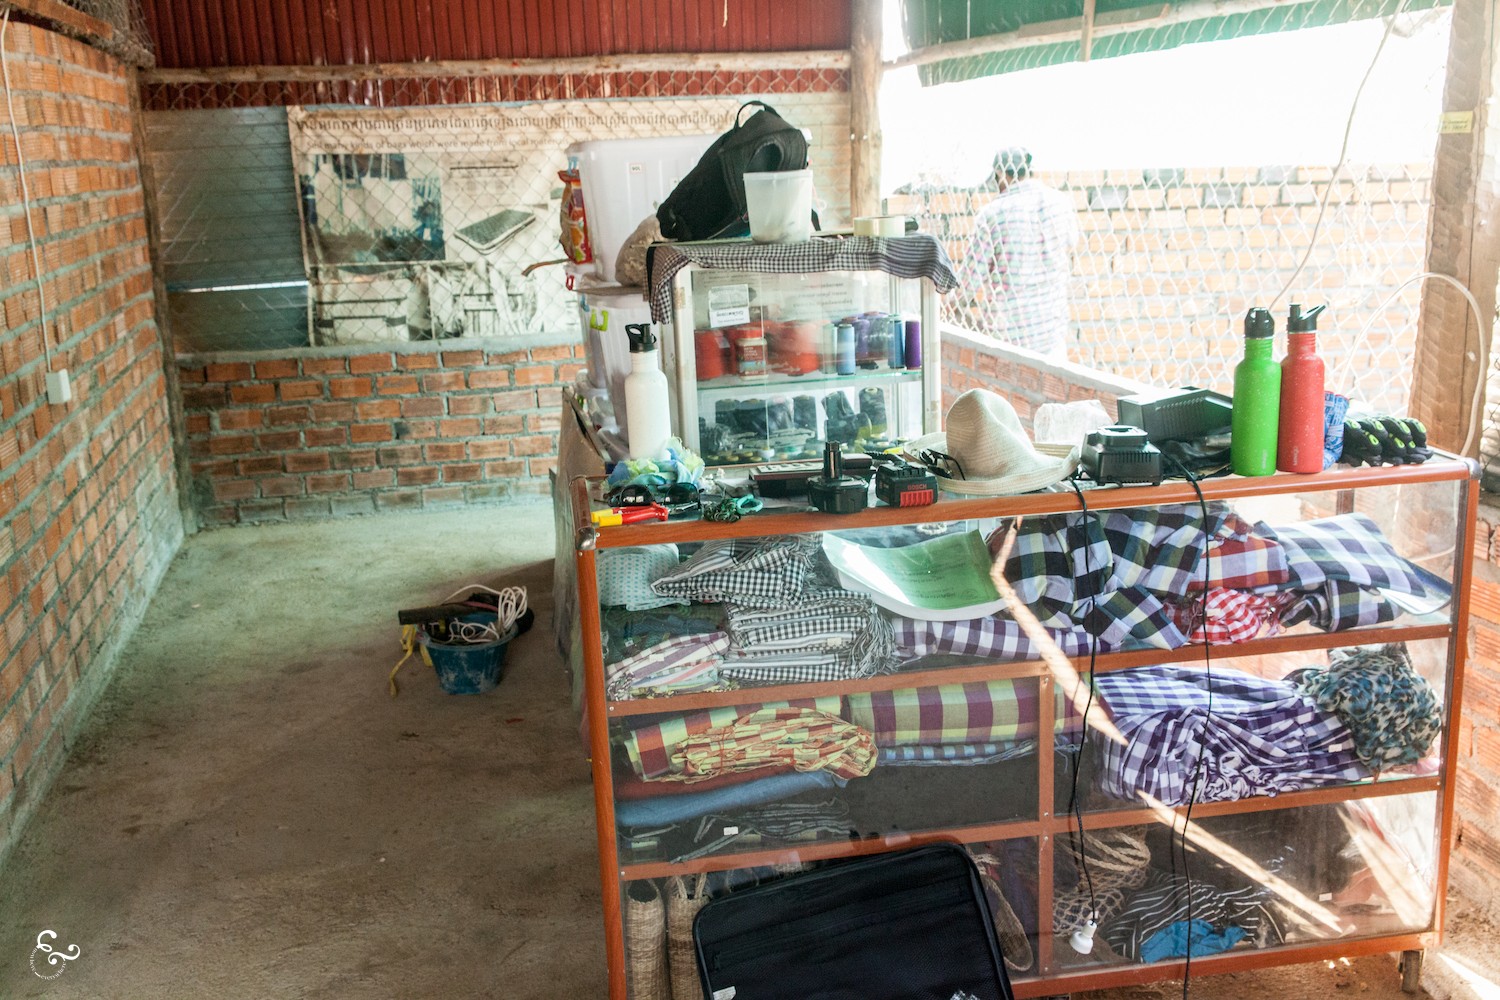 Nowhere & Everywhere Renovation Sewing Production Centre Studio Environmentalism Cambodia Sustainability Ethical Labor